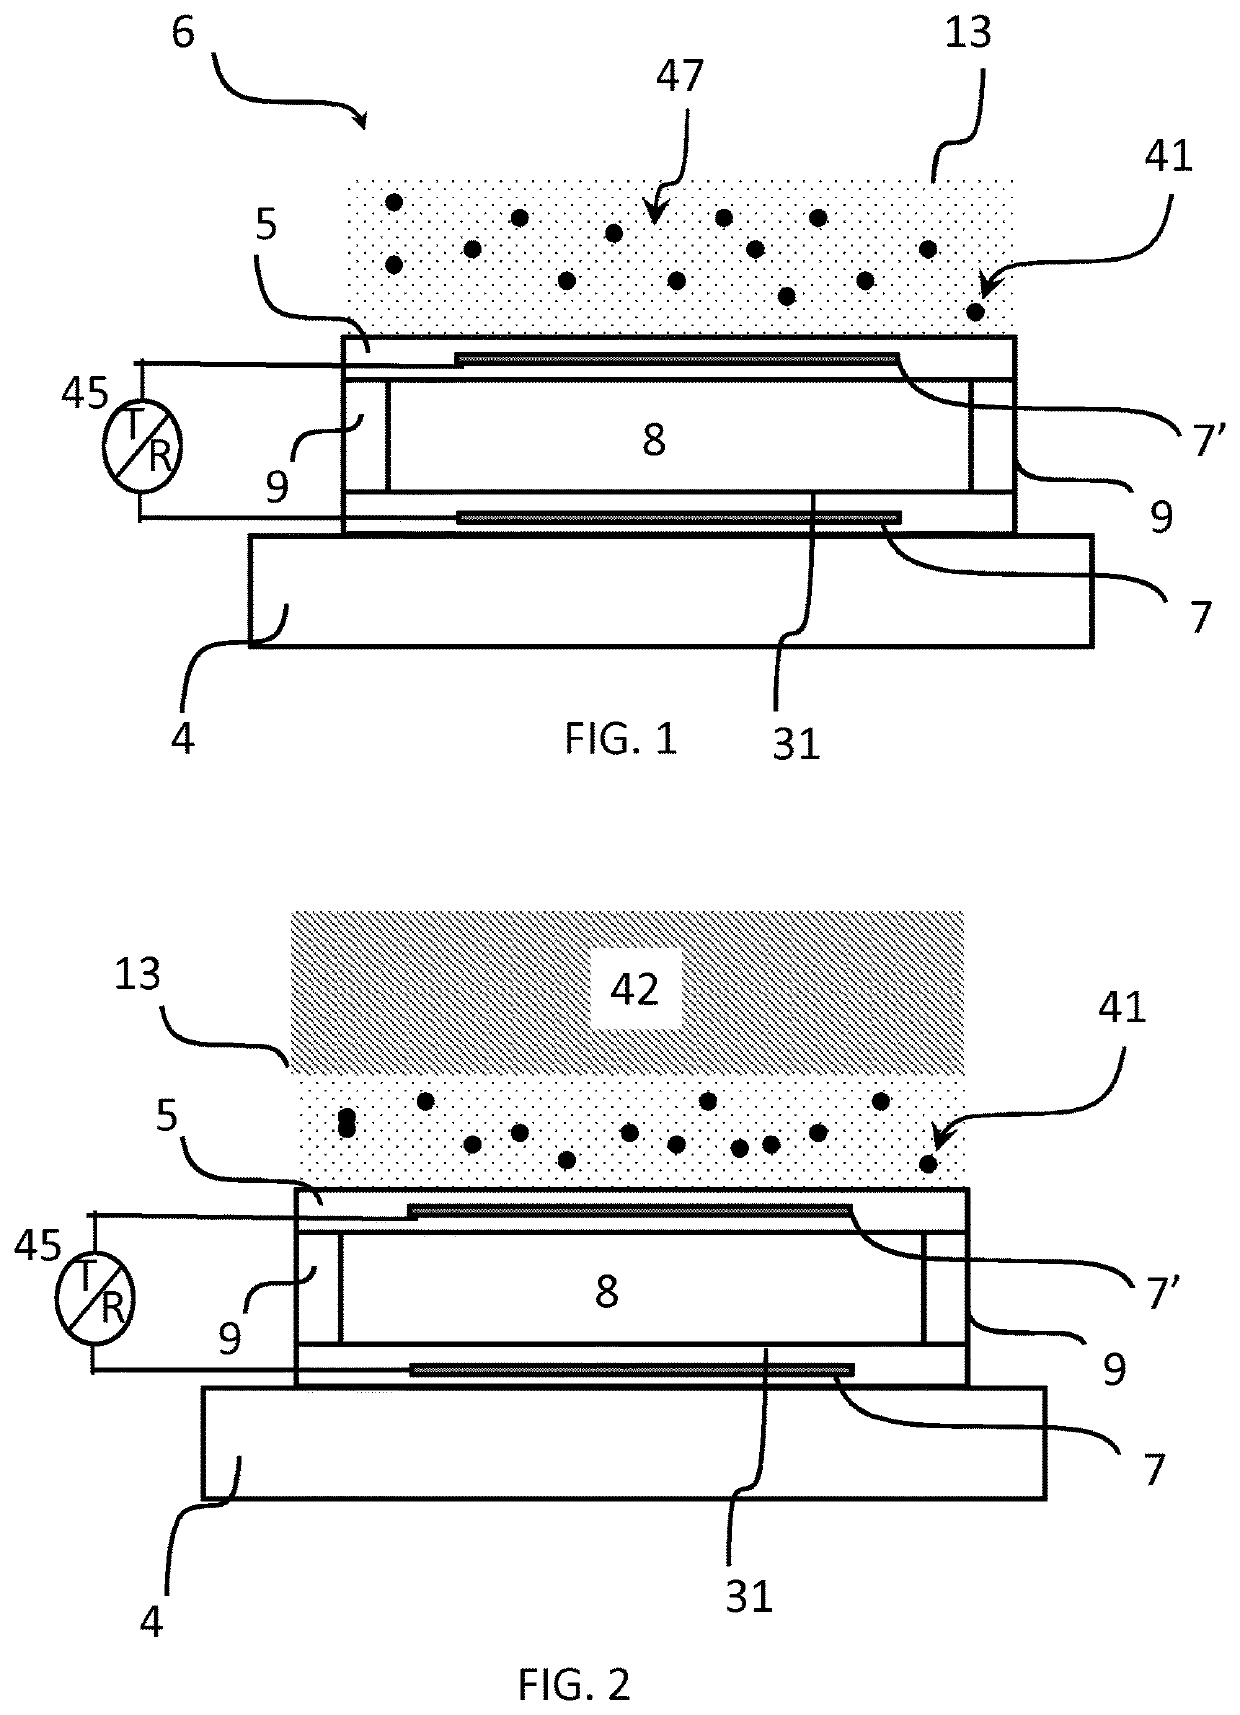 CMUT array comprising an acoustic window layer